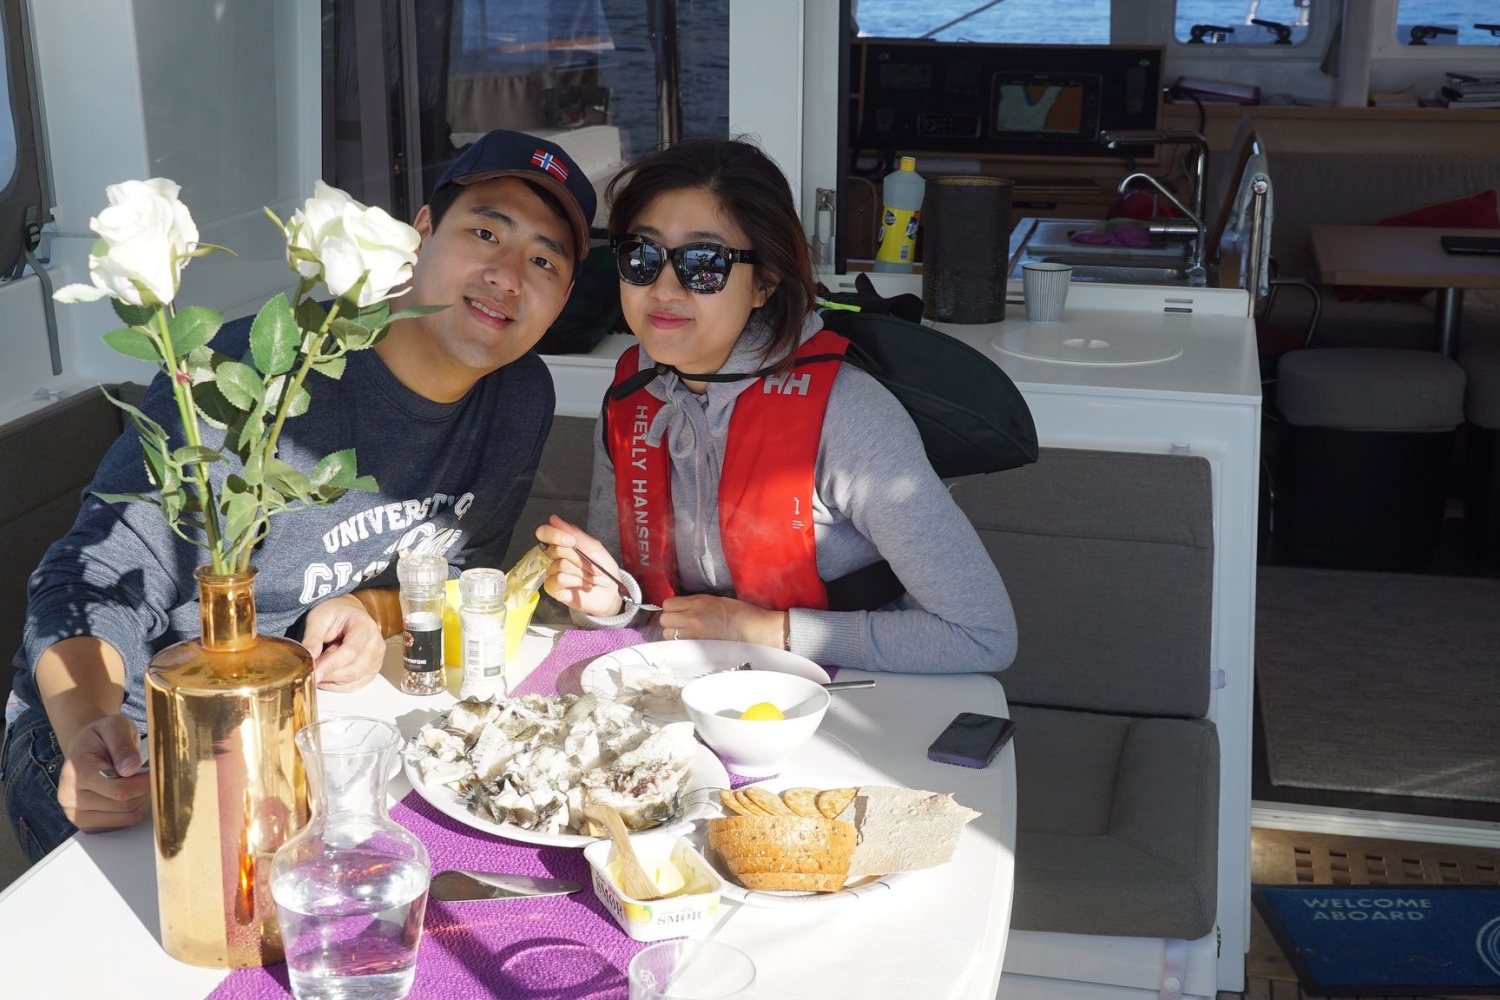 Arctic Fishing Trip with Self-Caught Fish for Lunch with the newest boat in town (APFI)